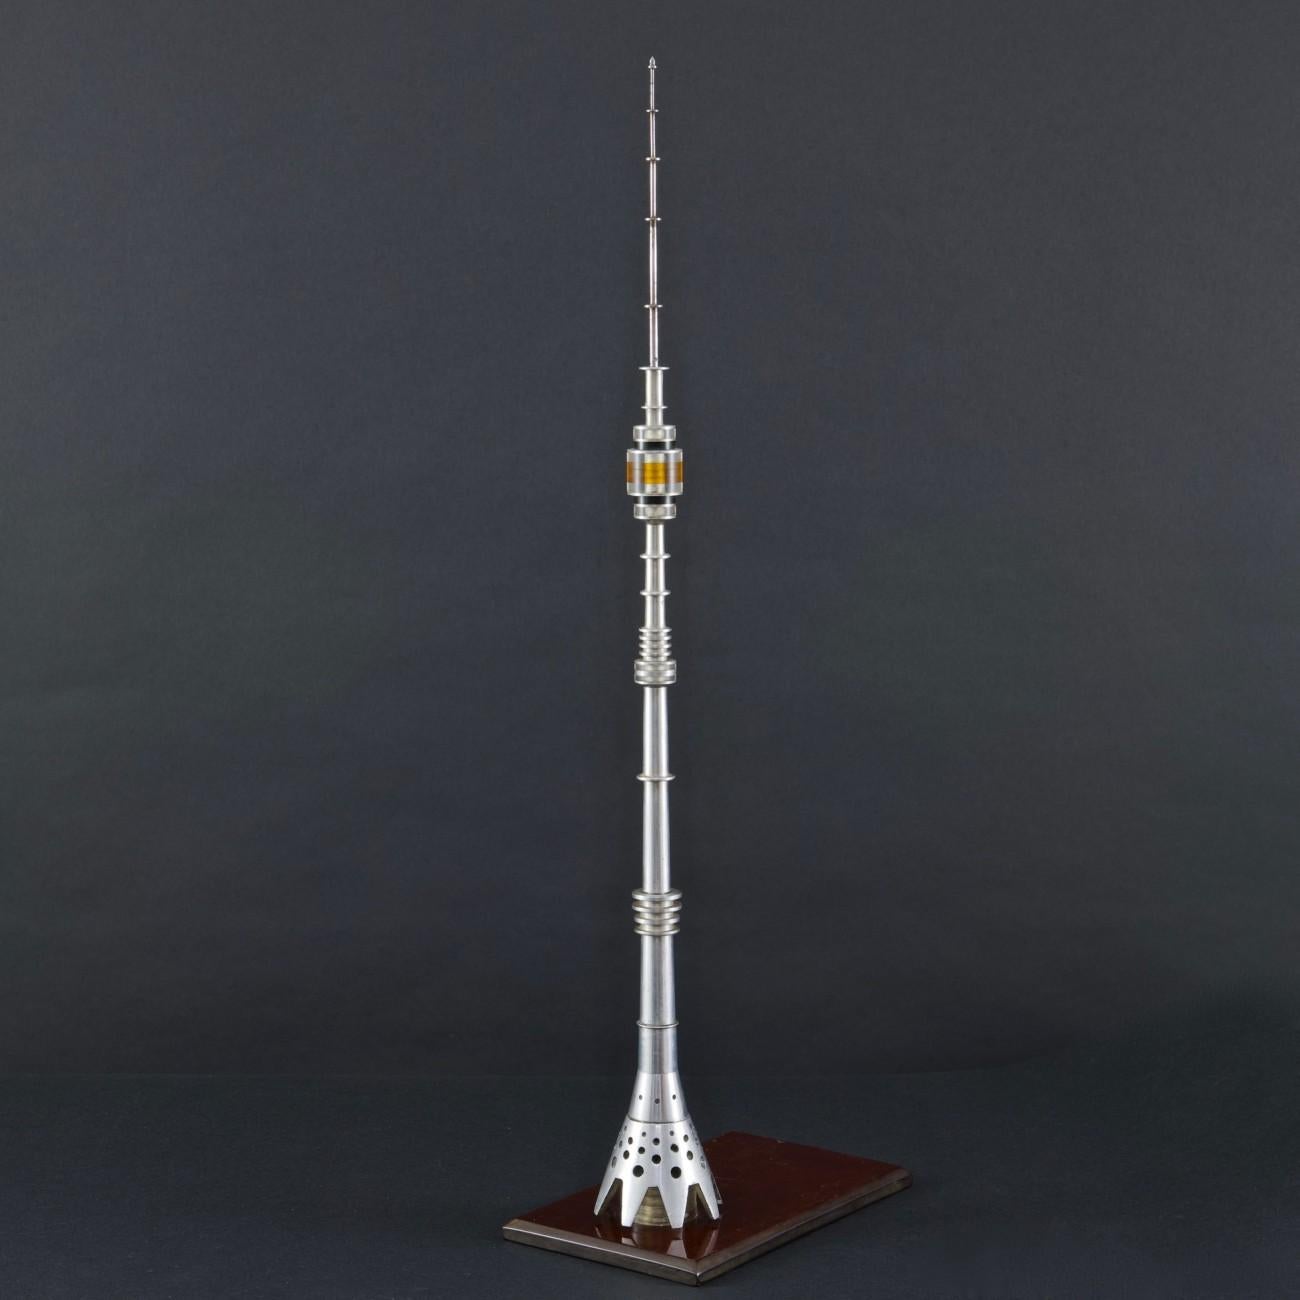 Architectural model of the Ostankino Tower, a radio and television tower in Moscow, that was distinguished by its record-setting height 1,772 ft (540.1 metres) when it was completed in 1967.
The model is mainly made of precision turned sections of